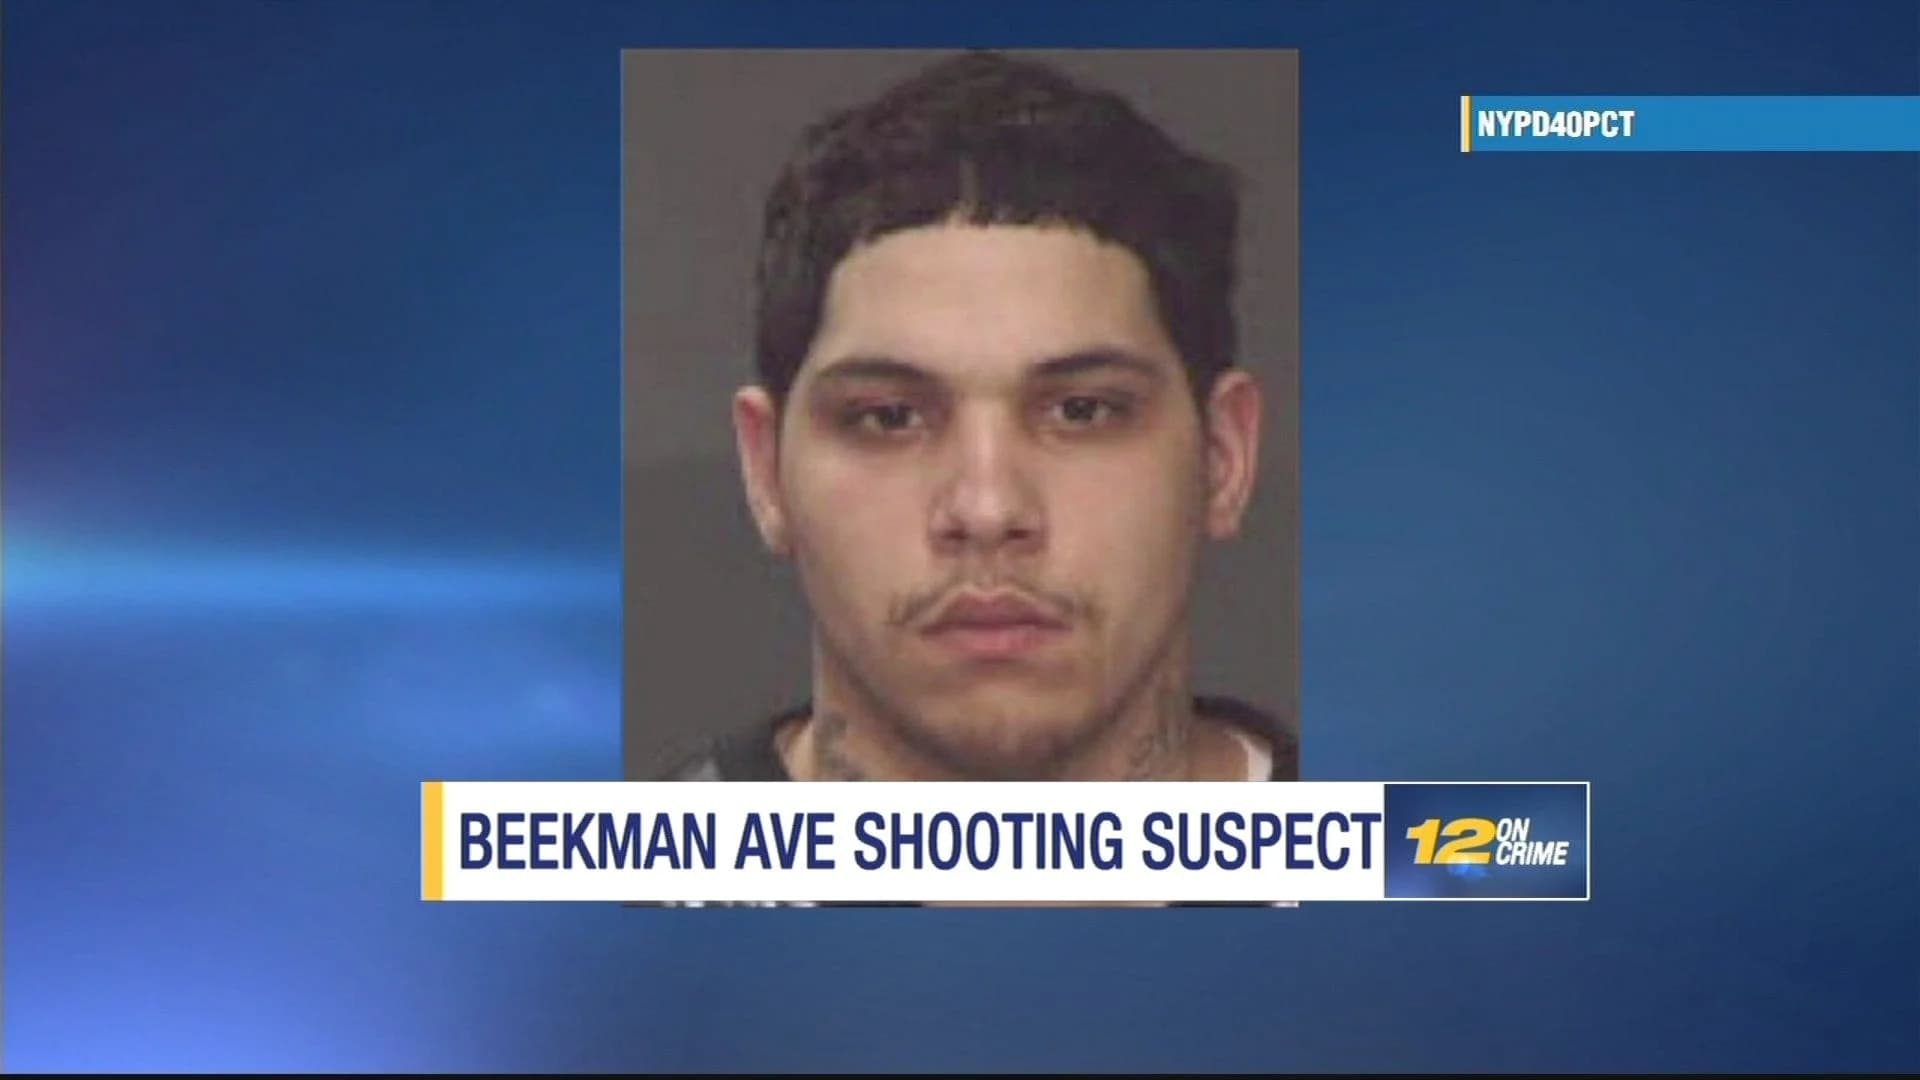 Police release image of alleged Beekman Ave. shooter